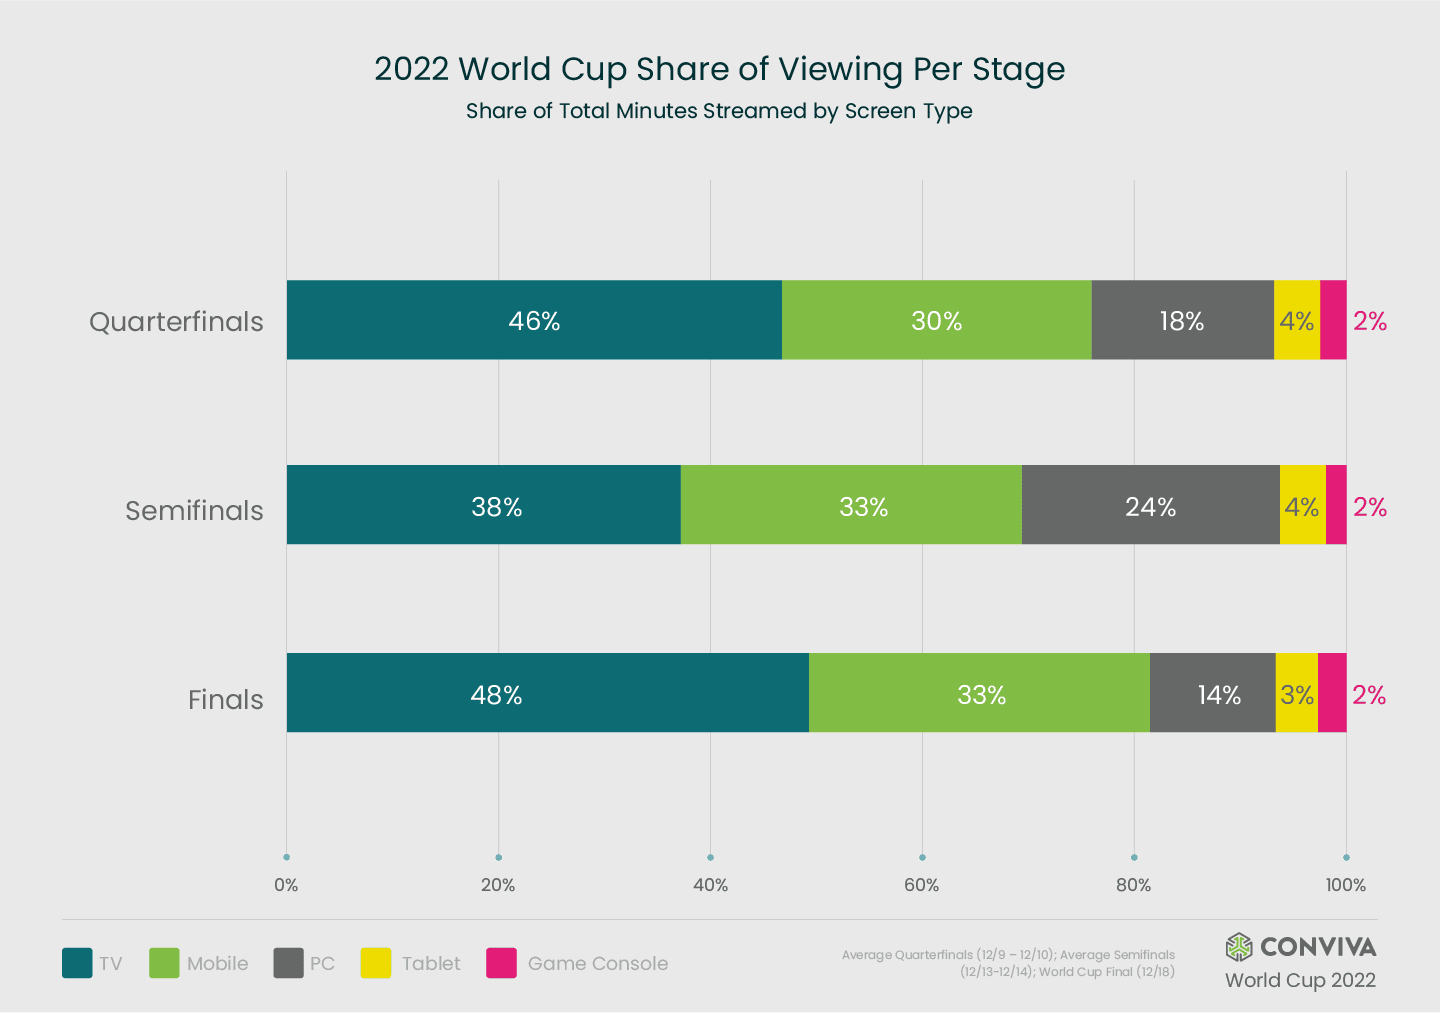 Chart showing the share of World Cup viewing per device type across the three stages of the competition.